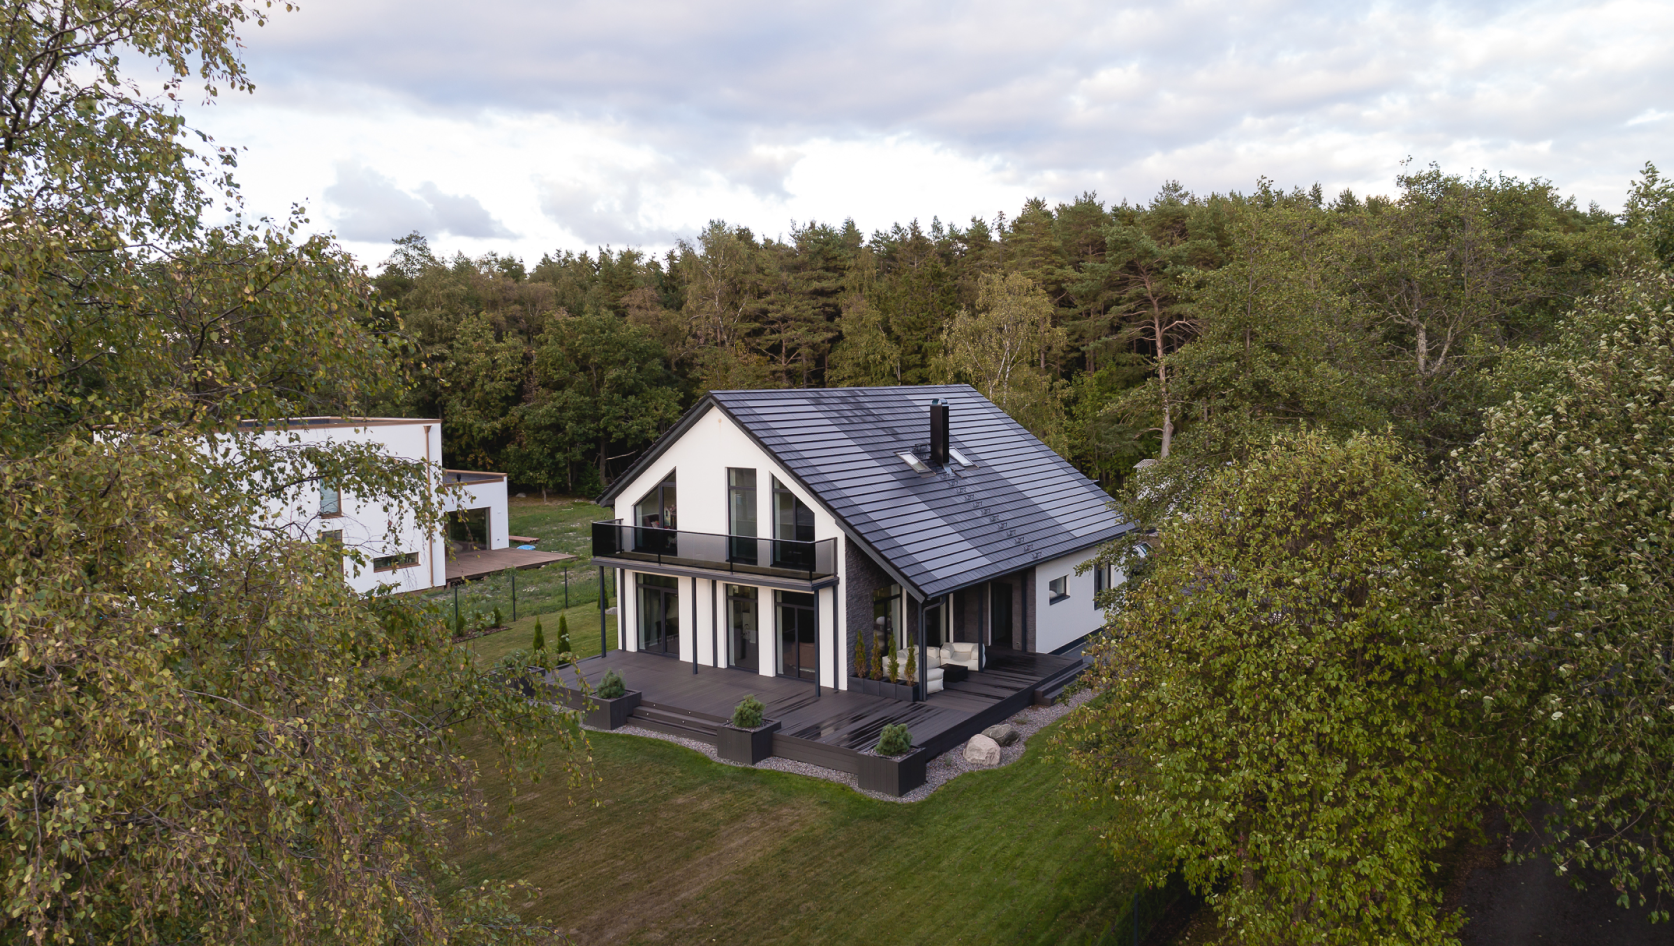 solar tiled roof on a modern house combined with black roof tiles